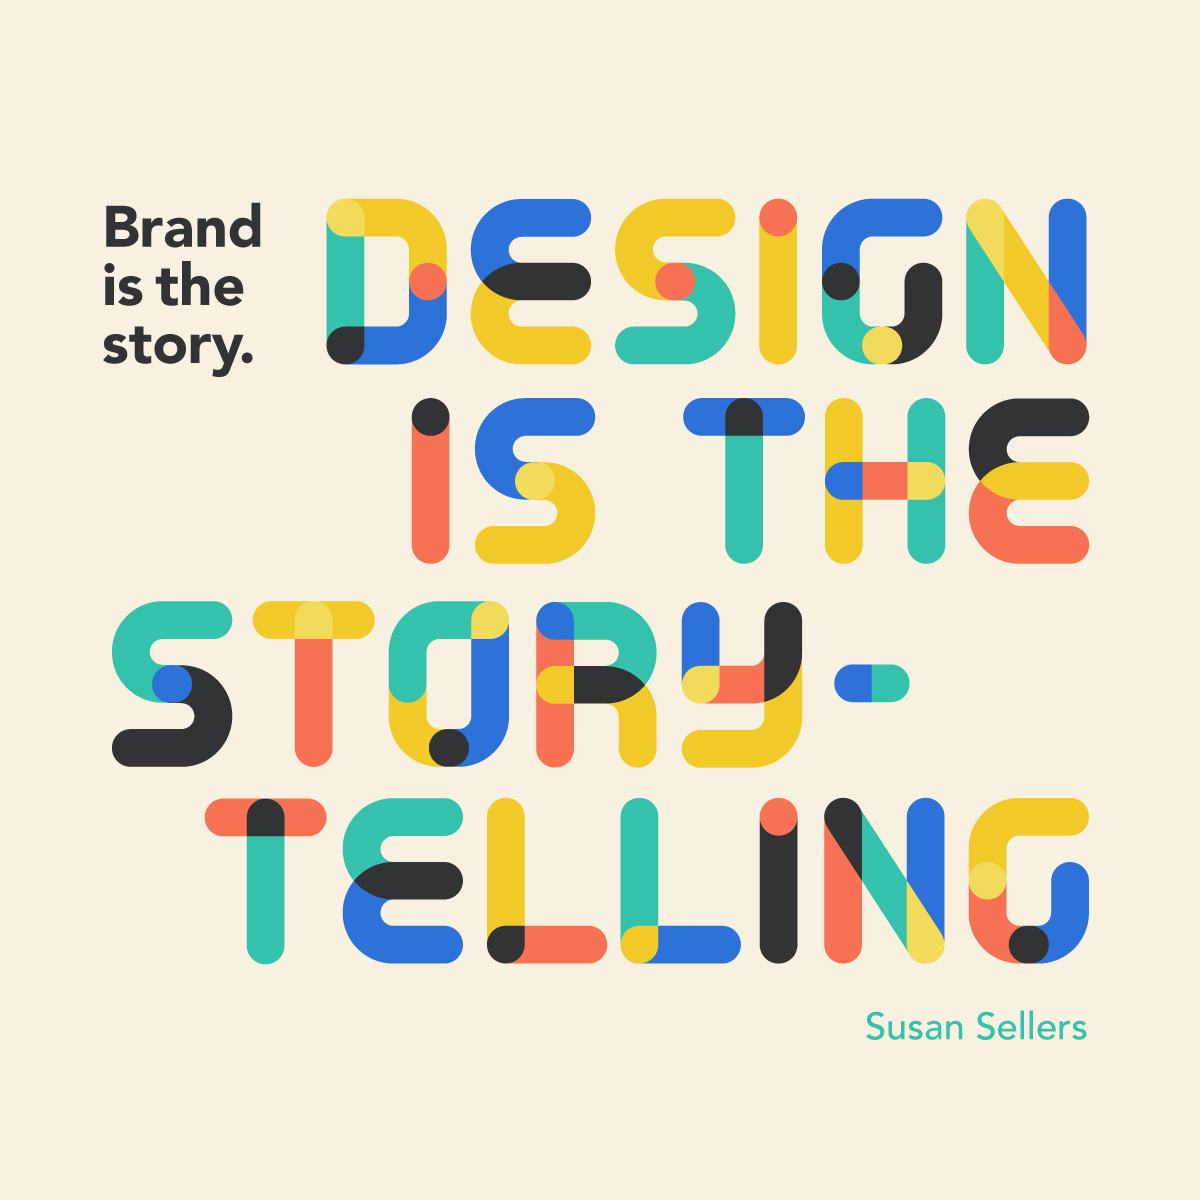 "Brand is the story. Design is the storytelling." Susan Sellers